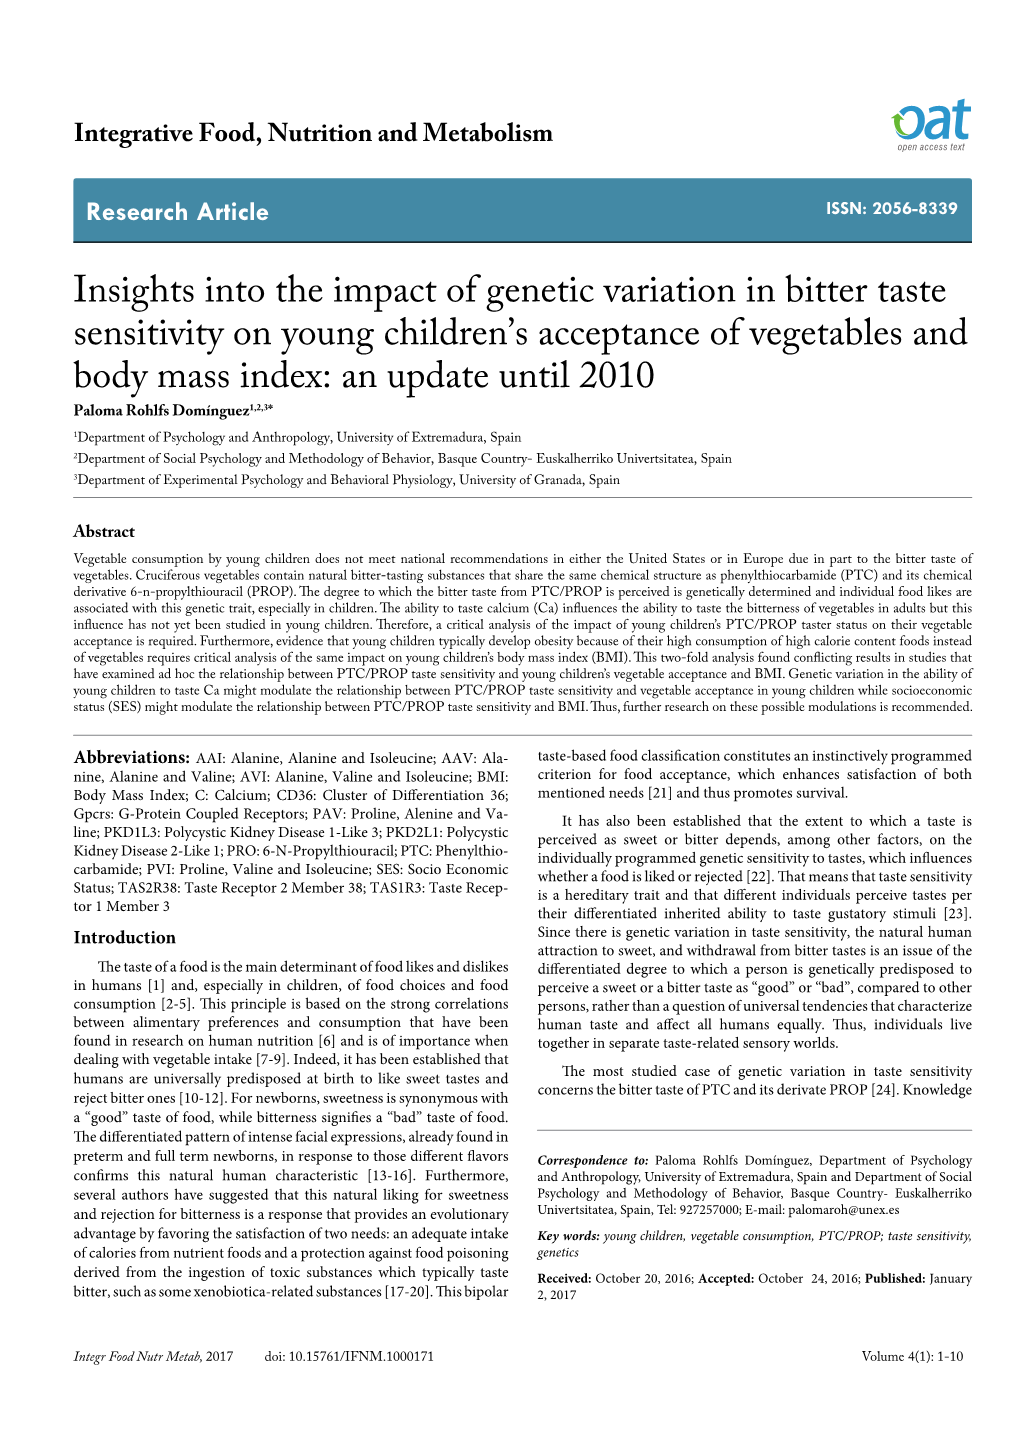 Insights Into the Impact of Genetic Variation in Bitter Taste Sensitivity On